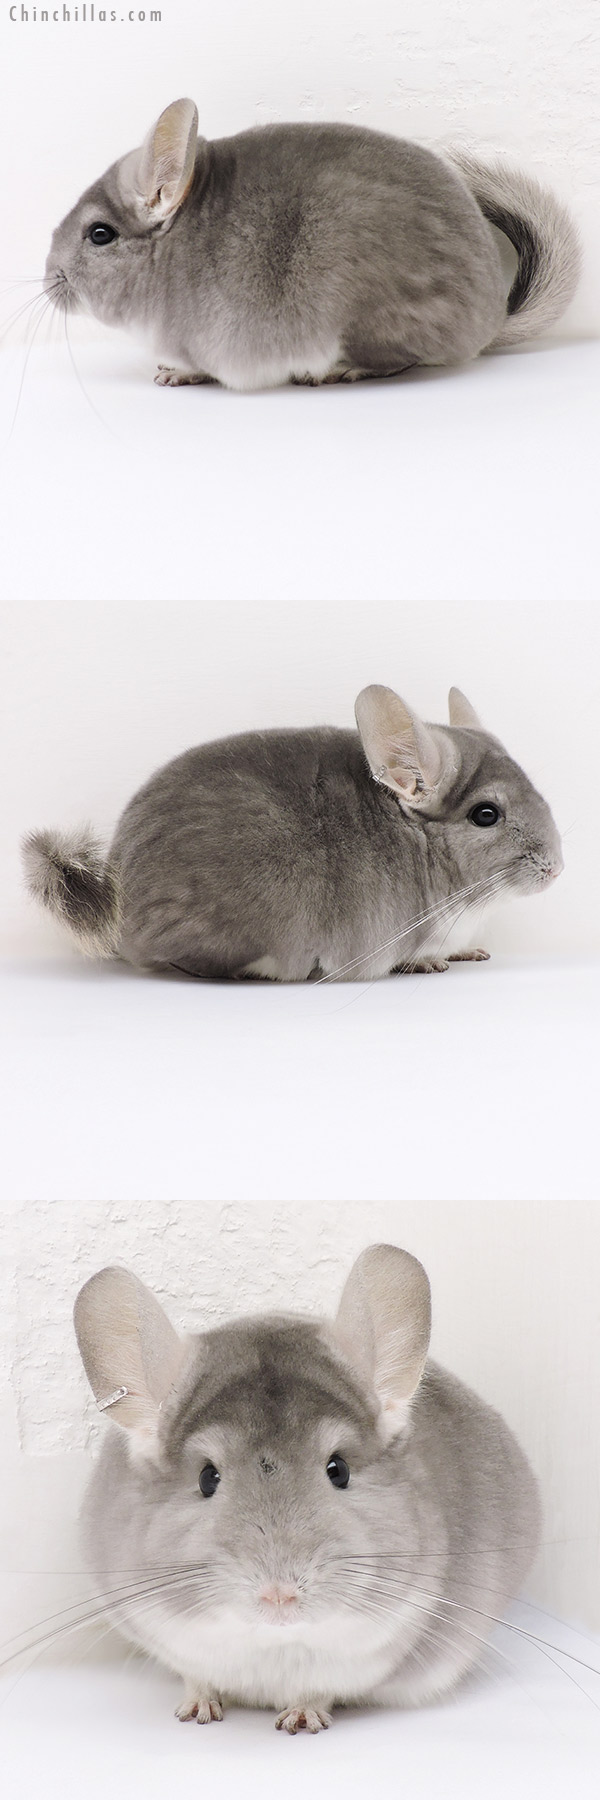 Chinchilla or related item offered for sale or export on Chinchillas.com - 17014 Violet (  Royal Persian Angora Carrier ) Female Chinchilla